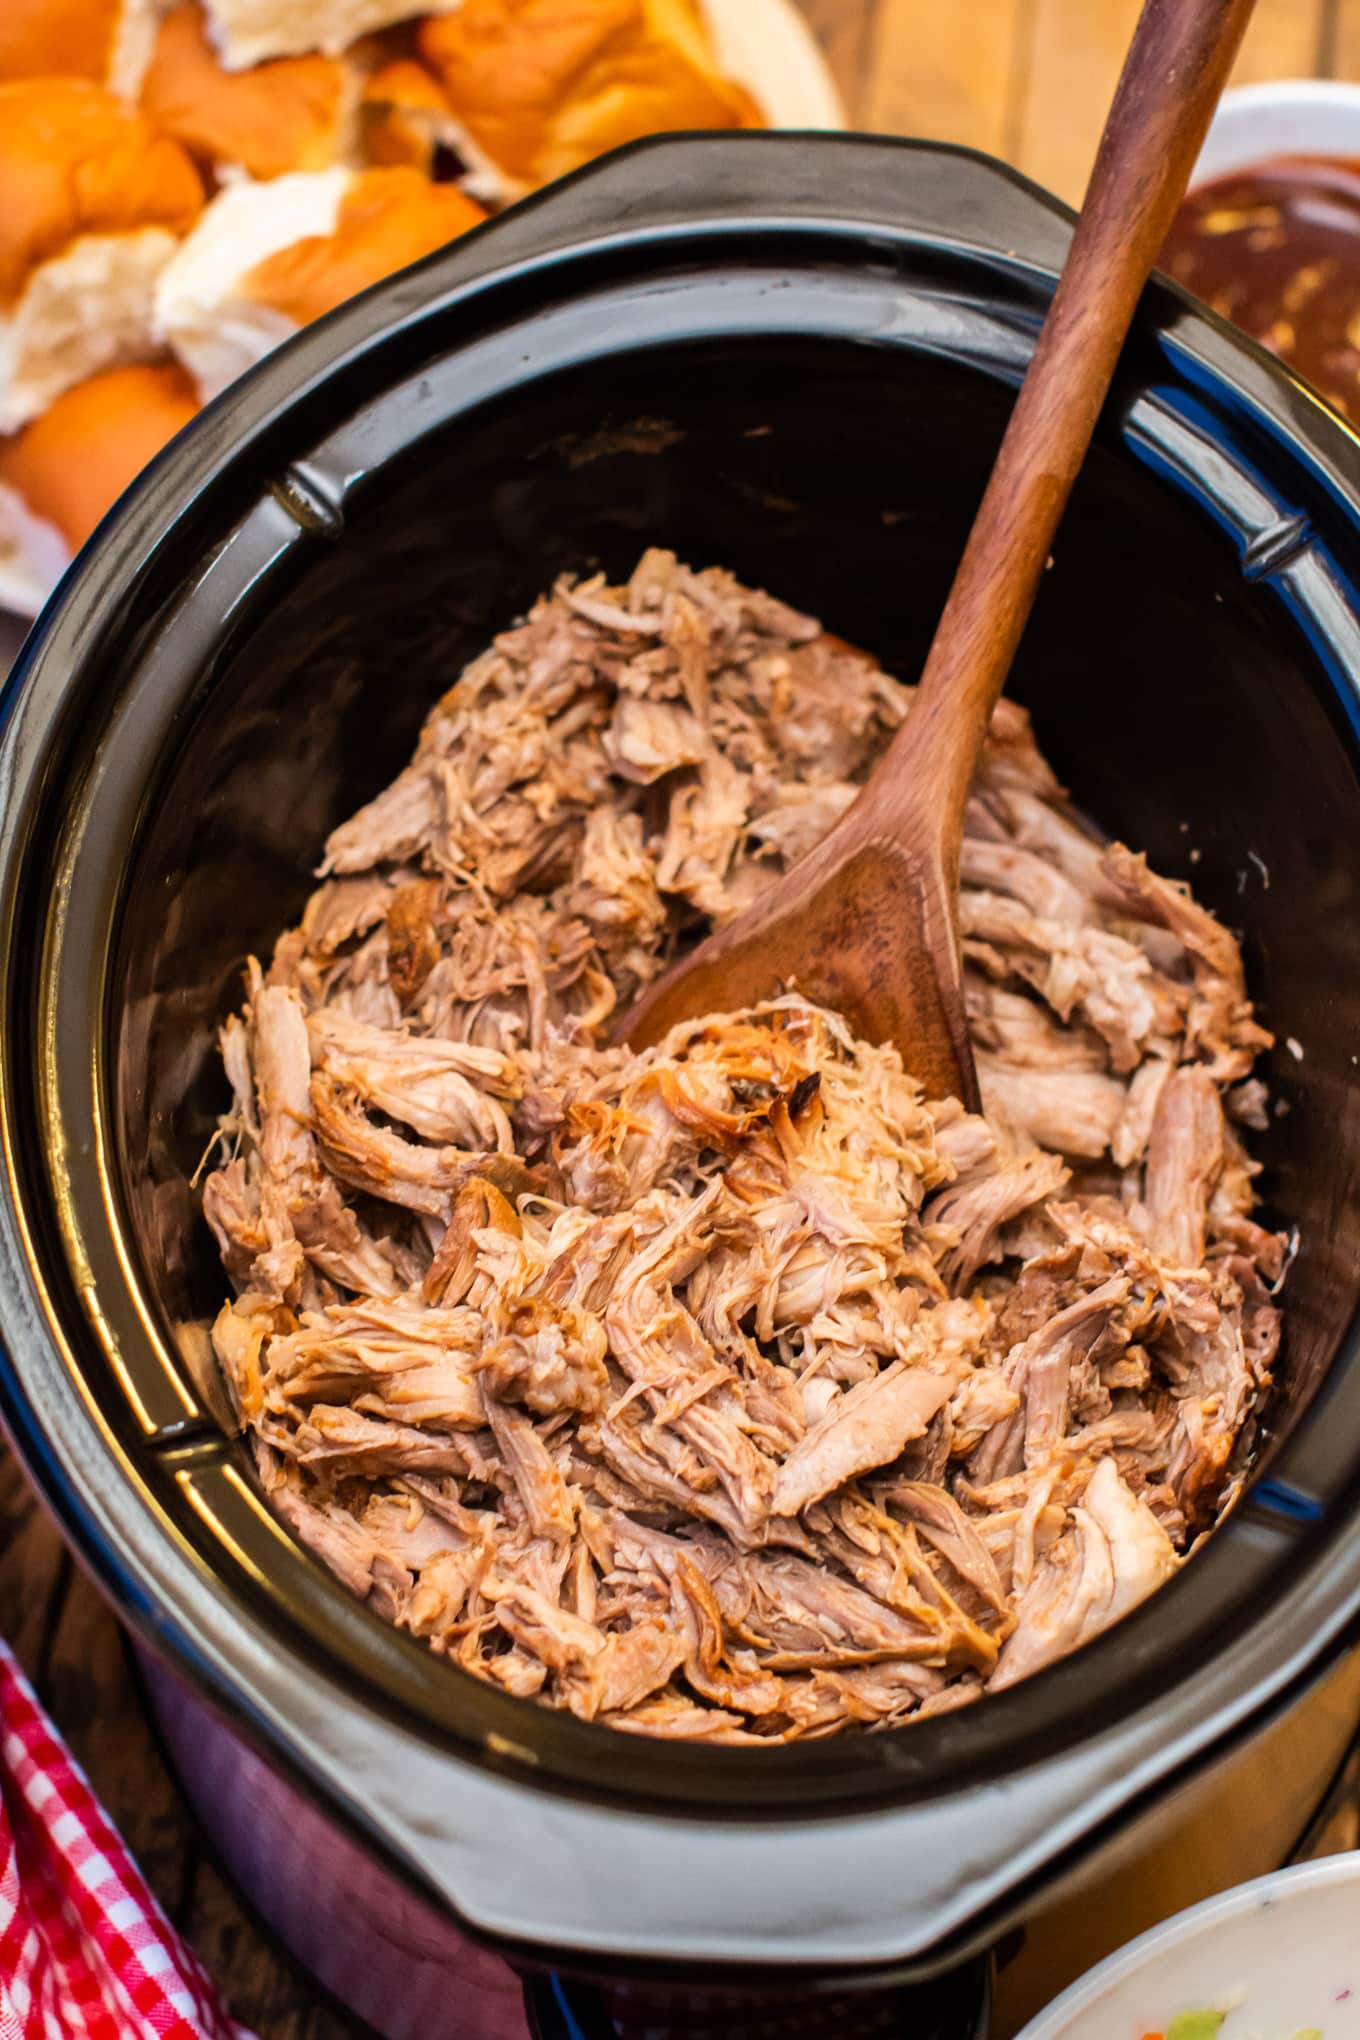 Easy Slow Cooker Pulled Pork Sandwiches The Magical Slow Cooker,What Is A Pergola Good For